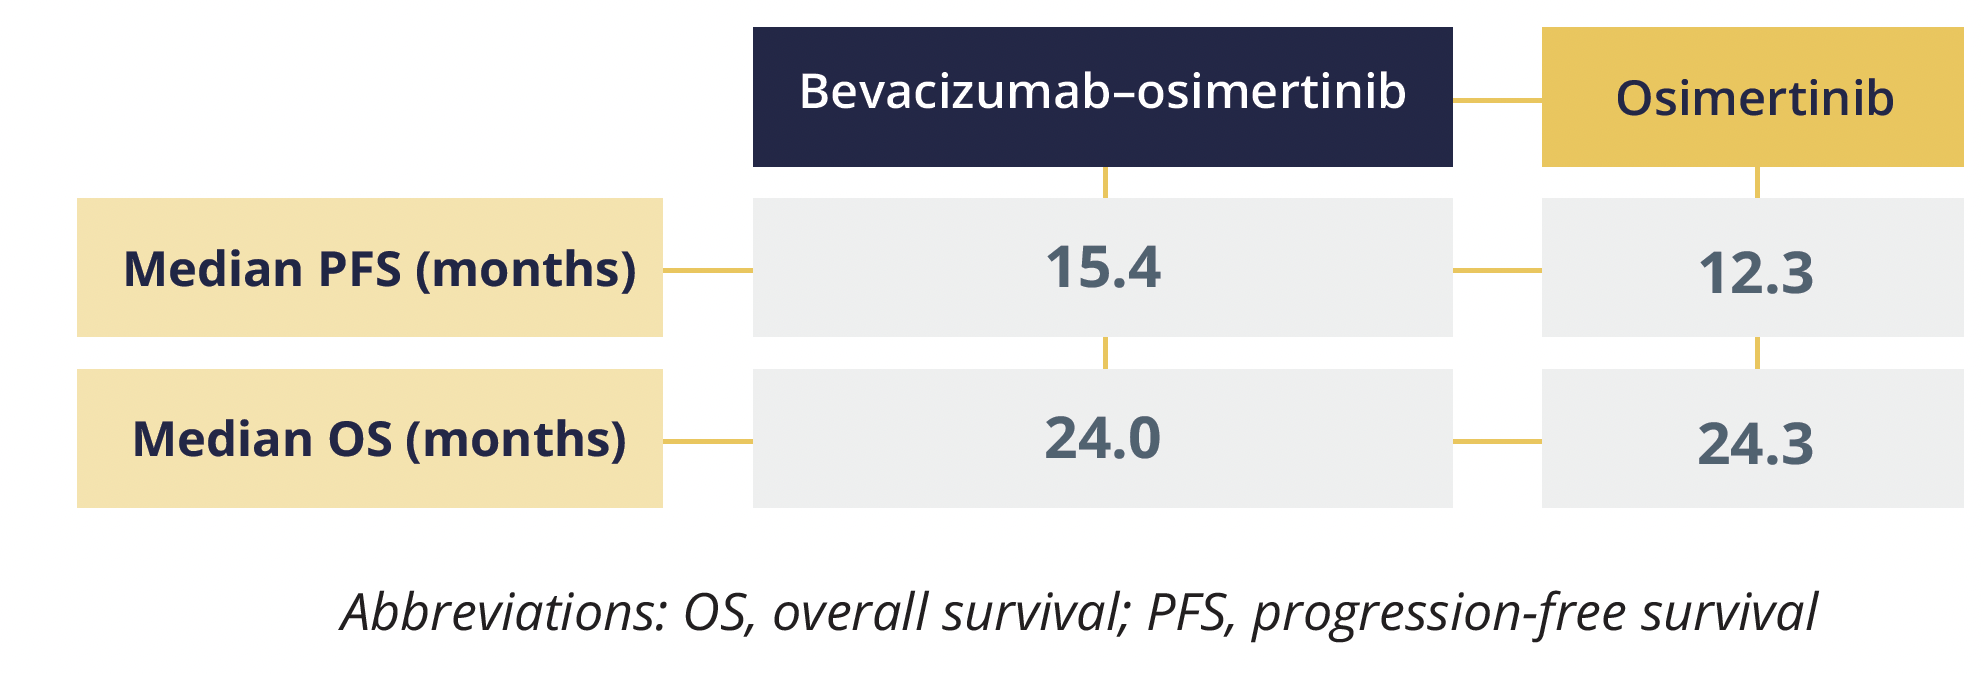 Adding bevacizumab to osimertinib does not significantly improve survival outcomes compared with osimertinib alone